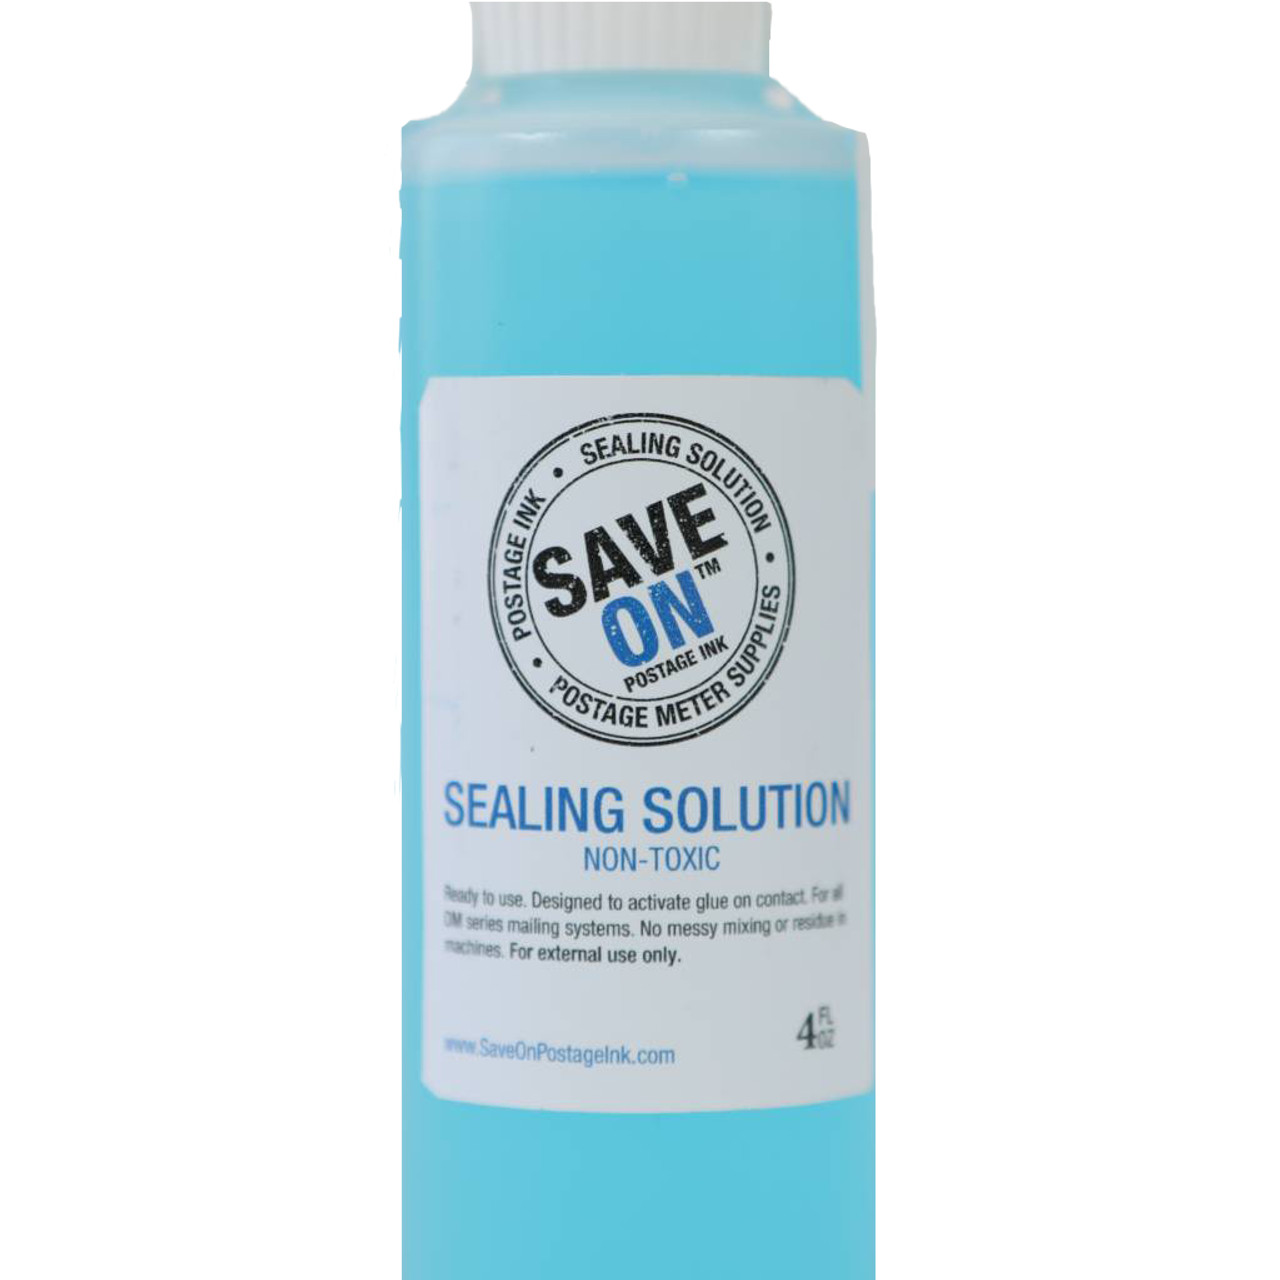 Buy 64oz Envelope Sealing Solution (Compare to Pitney Bowes 608-8